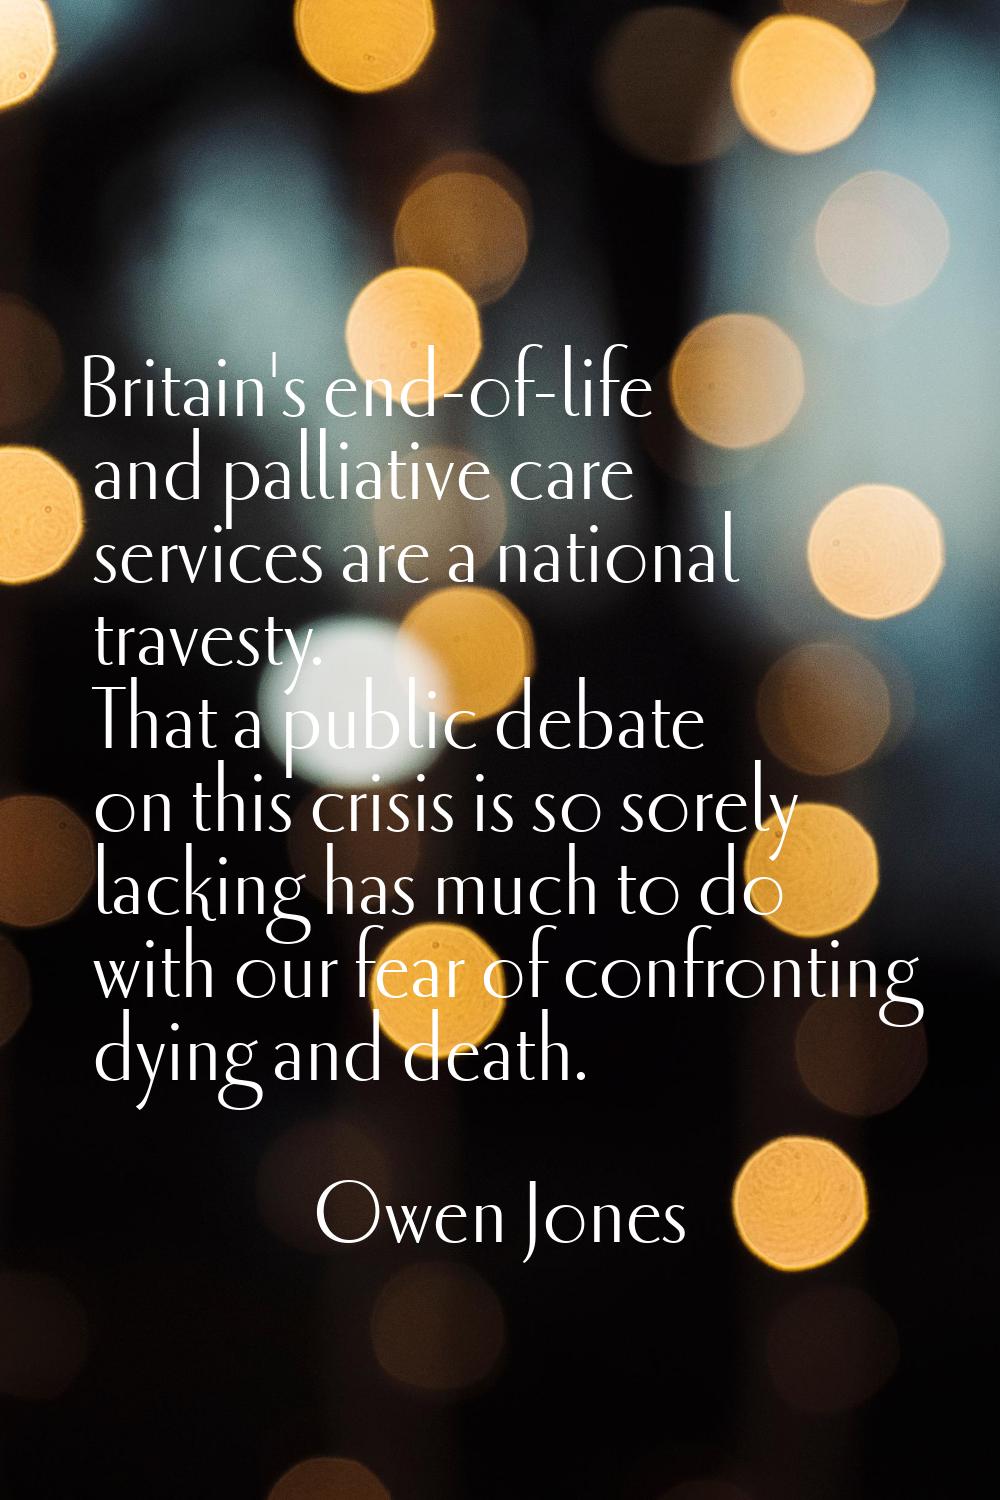 Britain's end-of-life and palliative care services are a national travesty. That a public debate on